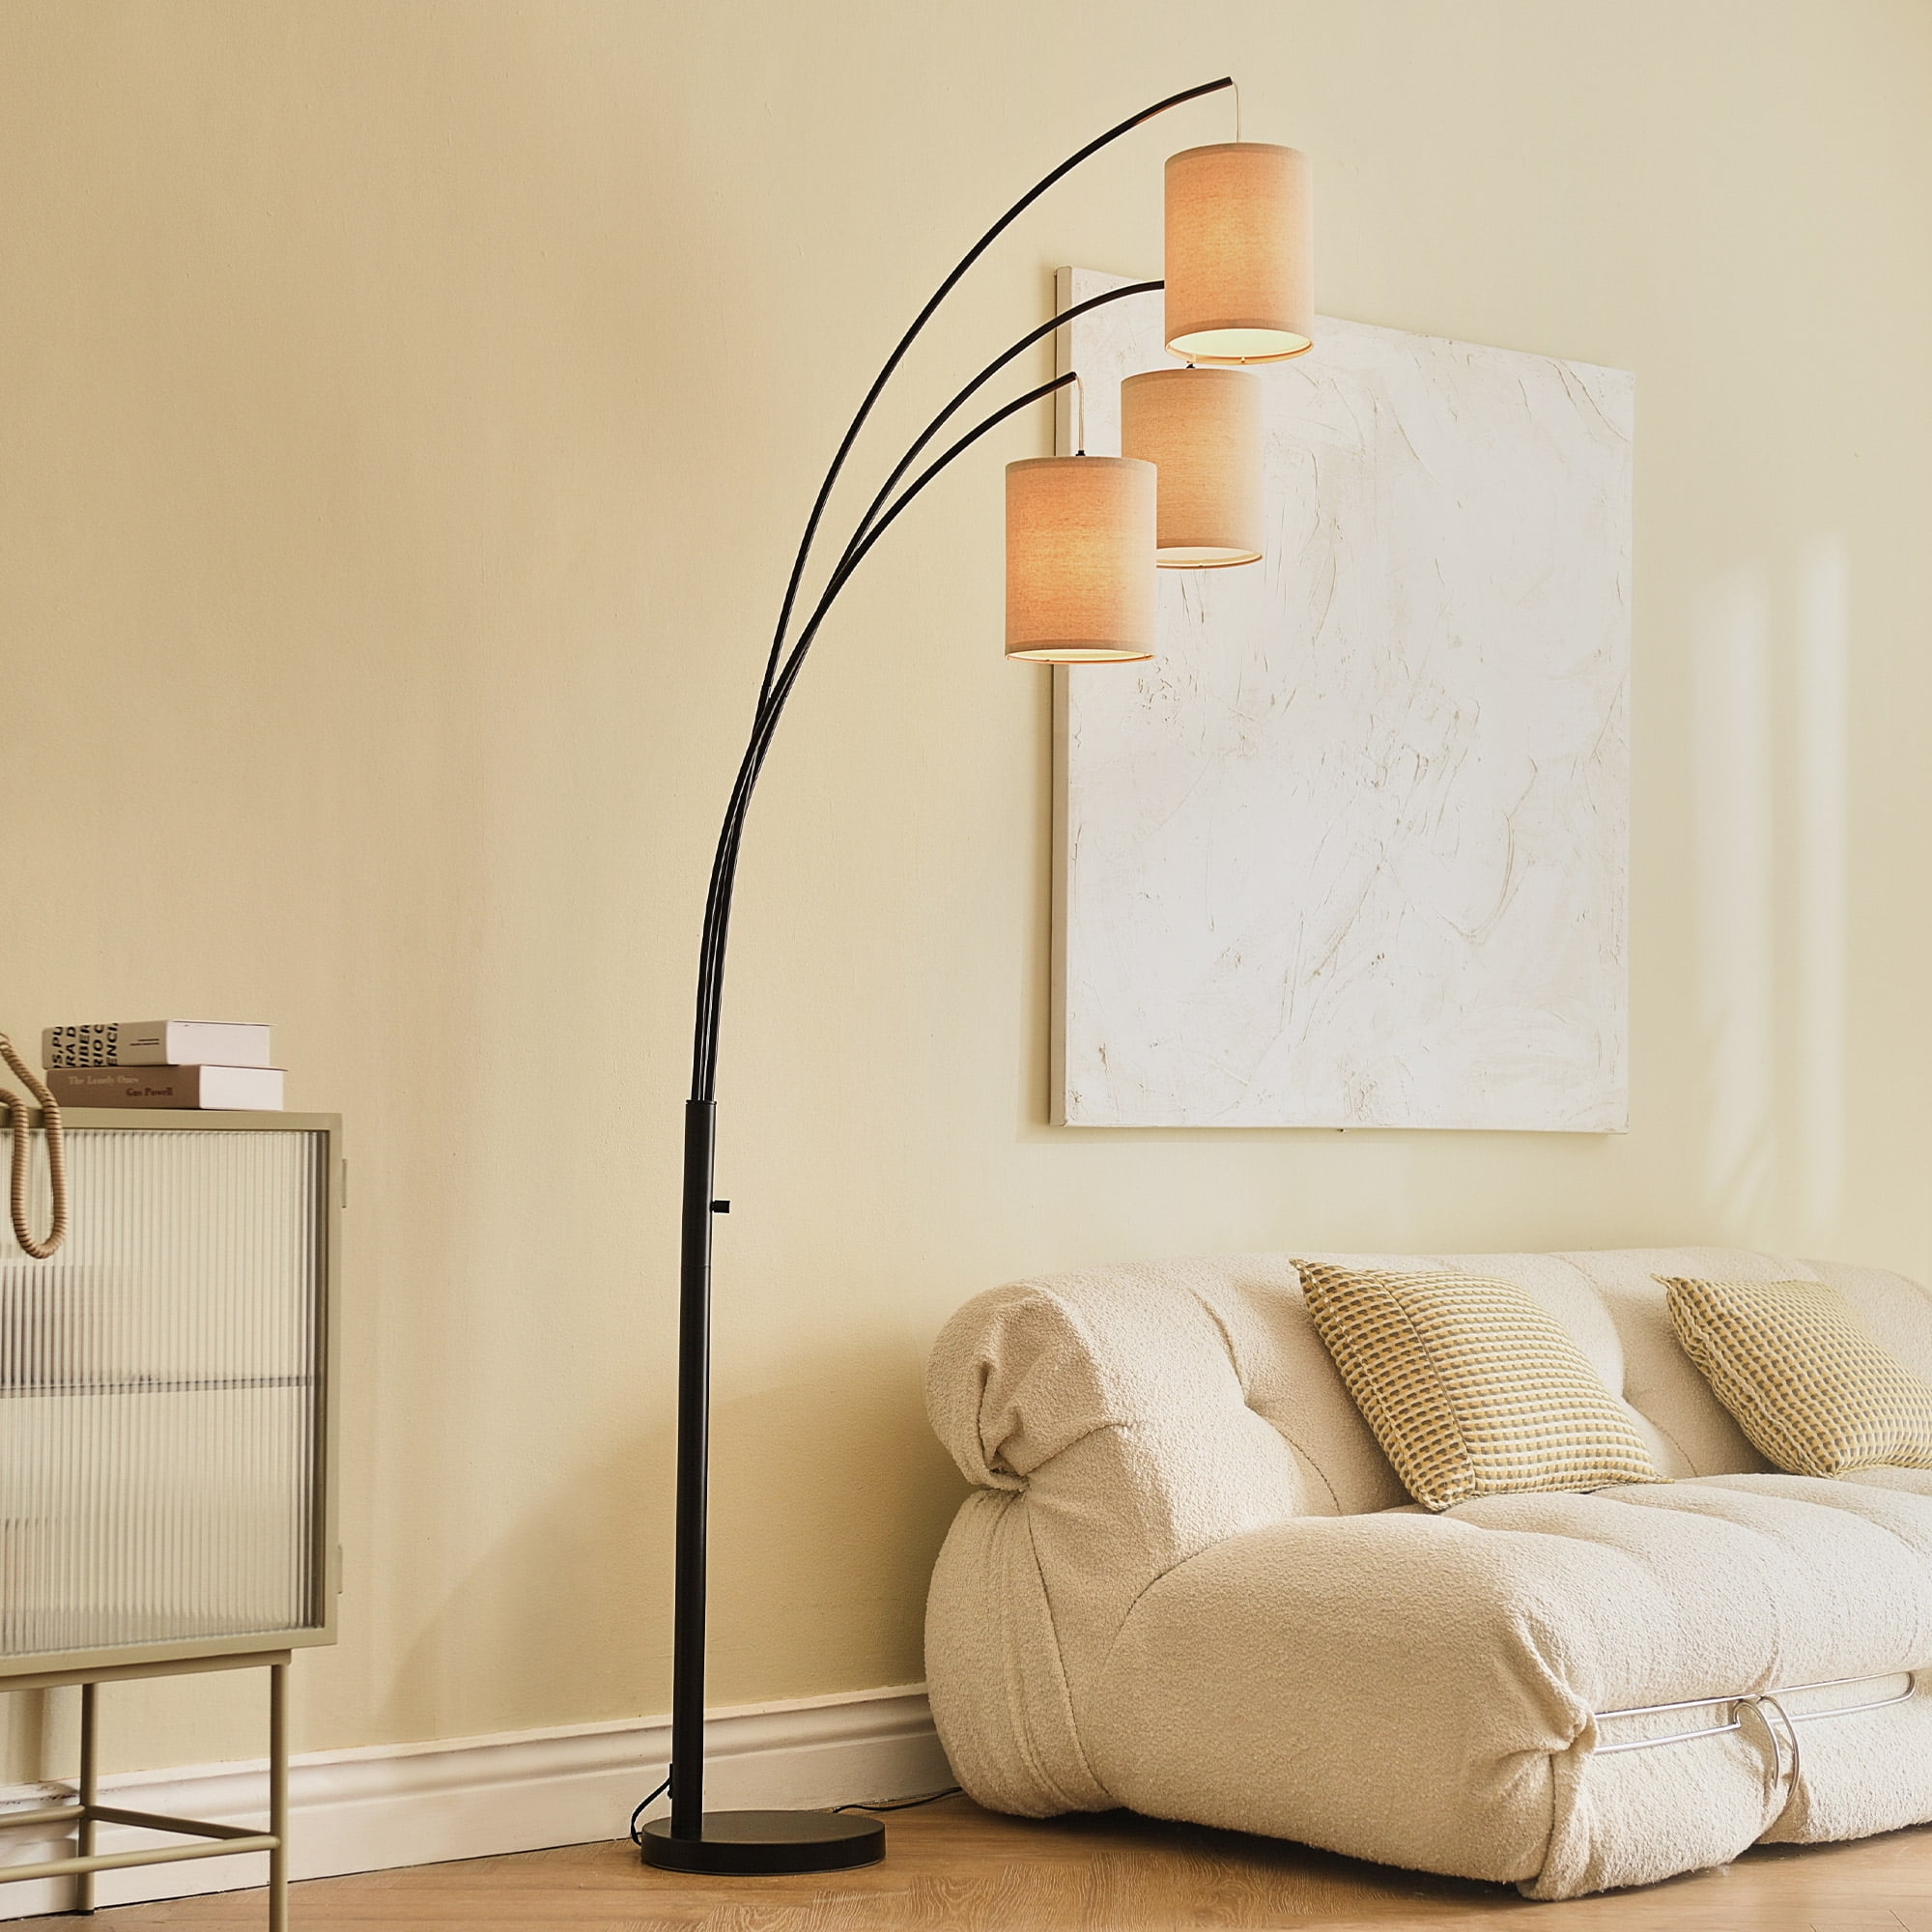 Better Homes & Gardens 61"H Floor Lamp, Black Finish with Real Wood Base, LED  Bulb Included - Walmart.com